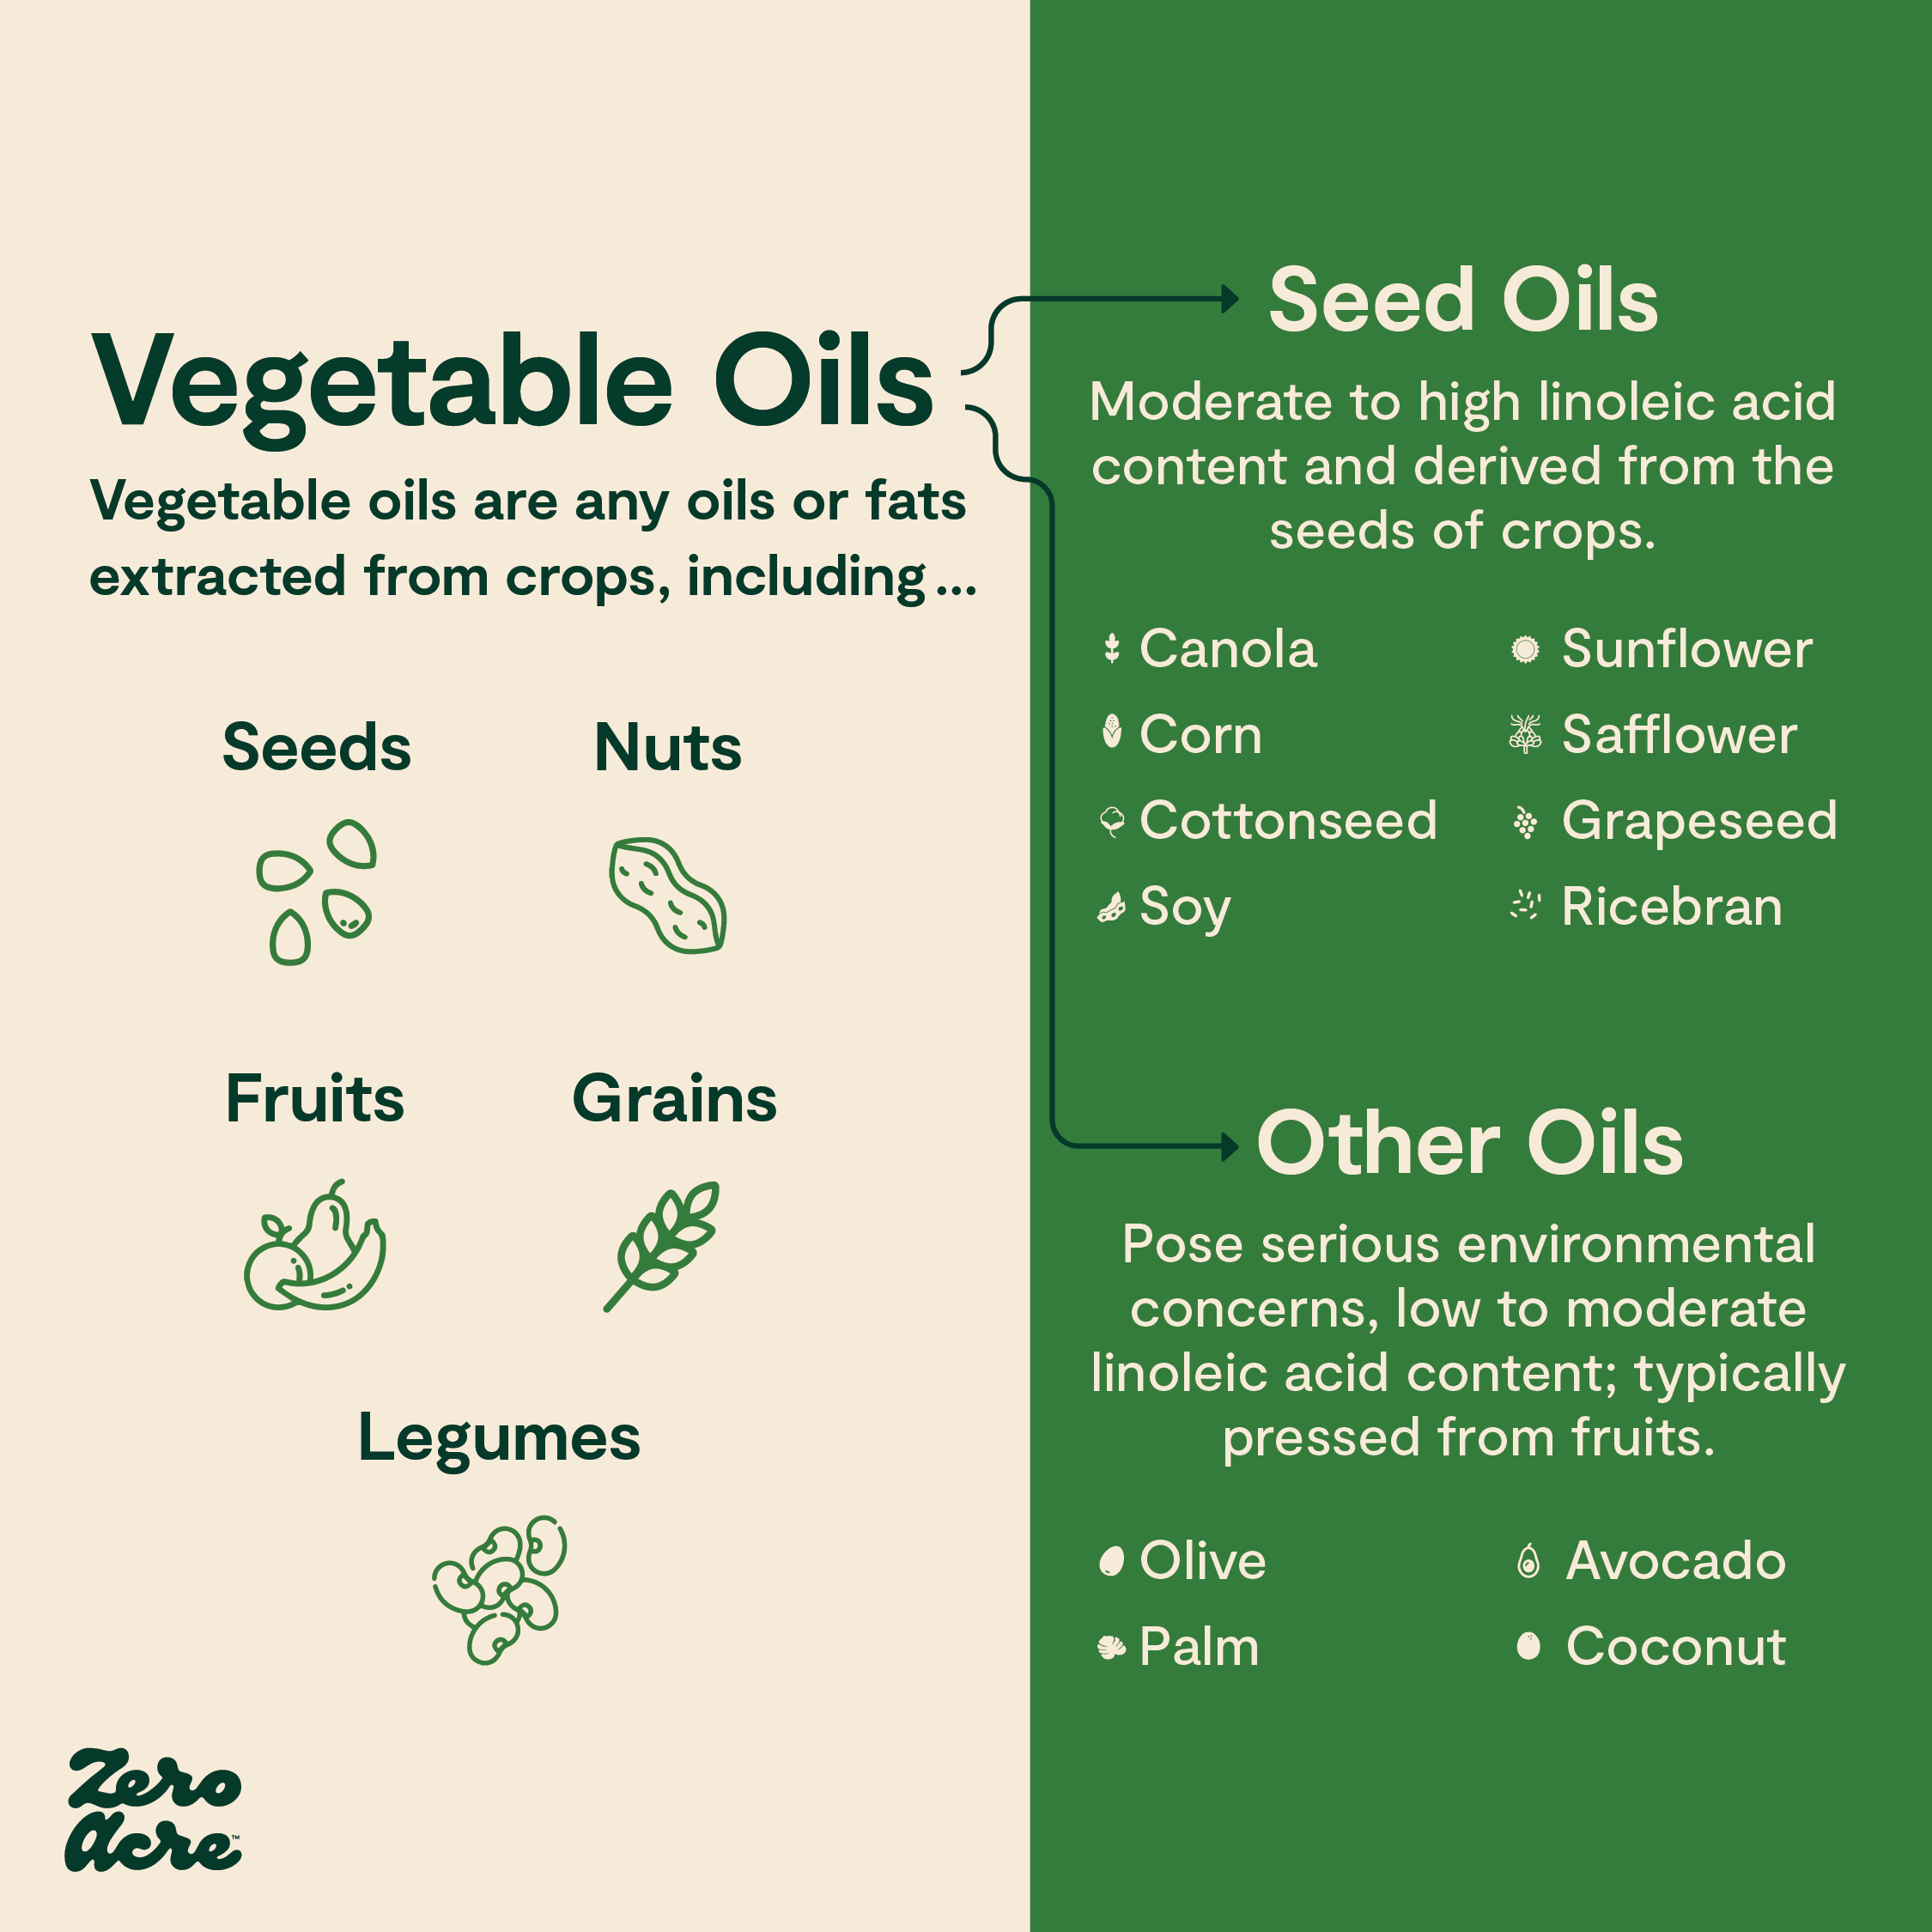 Vegetable oils are any oils or fats derived from crops, including fruits, grains, nuts, and seeds. This is a broad category that includes all crop-based oils. Seed oils, also called industrial seed oils, are a particular category of vegetable oils that are derived from seeds.